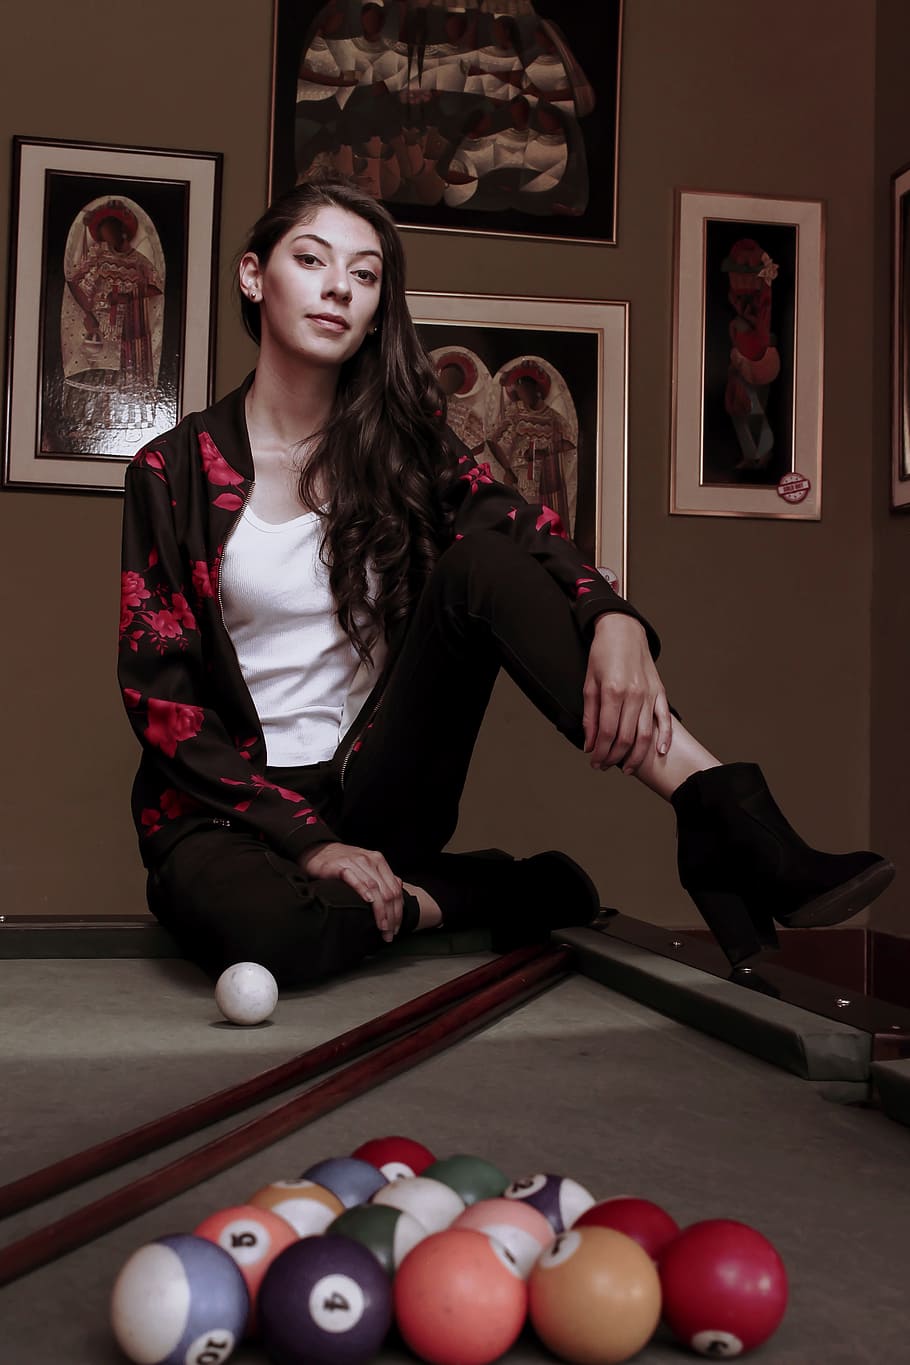 Girl, Billiards, Female, Boots, Pictures, look, pool ball, pool cue